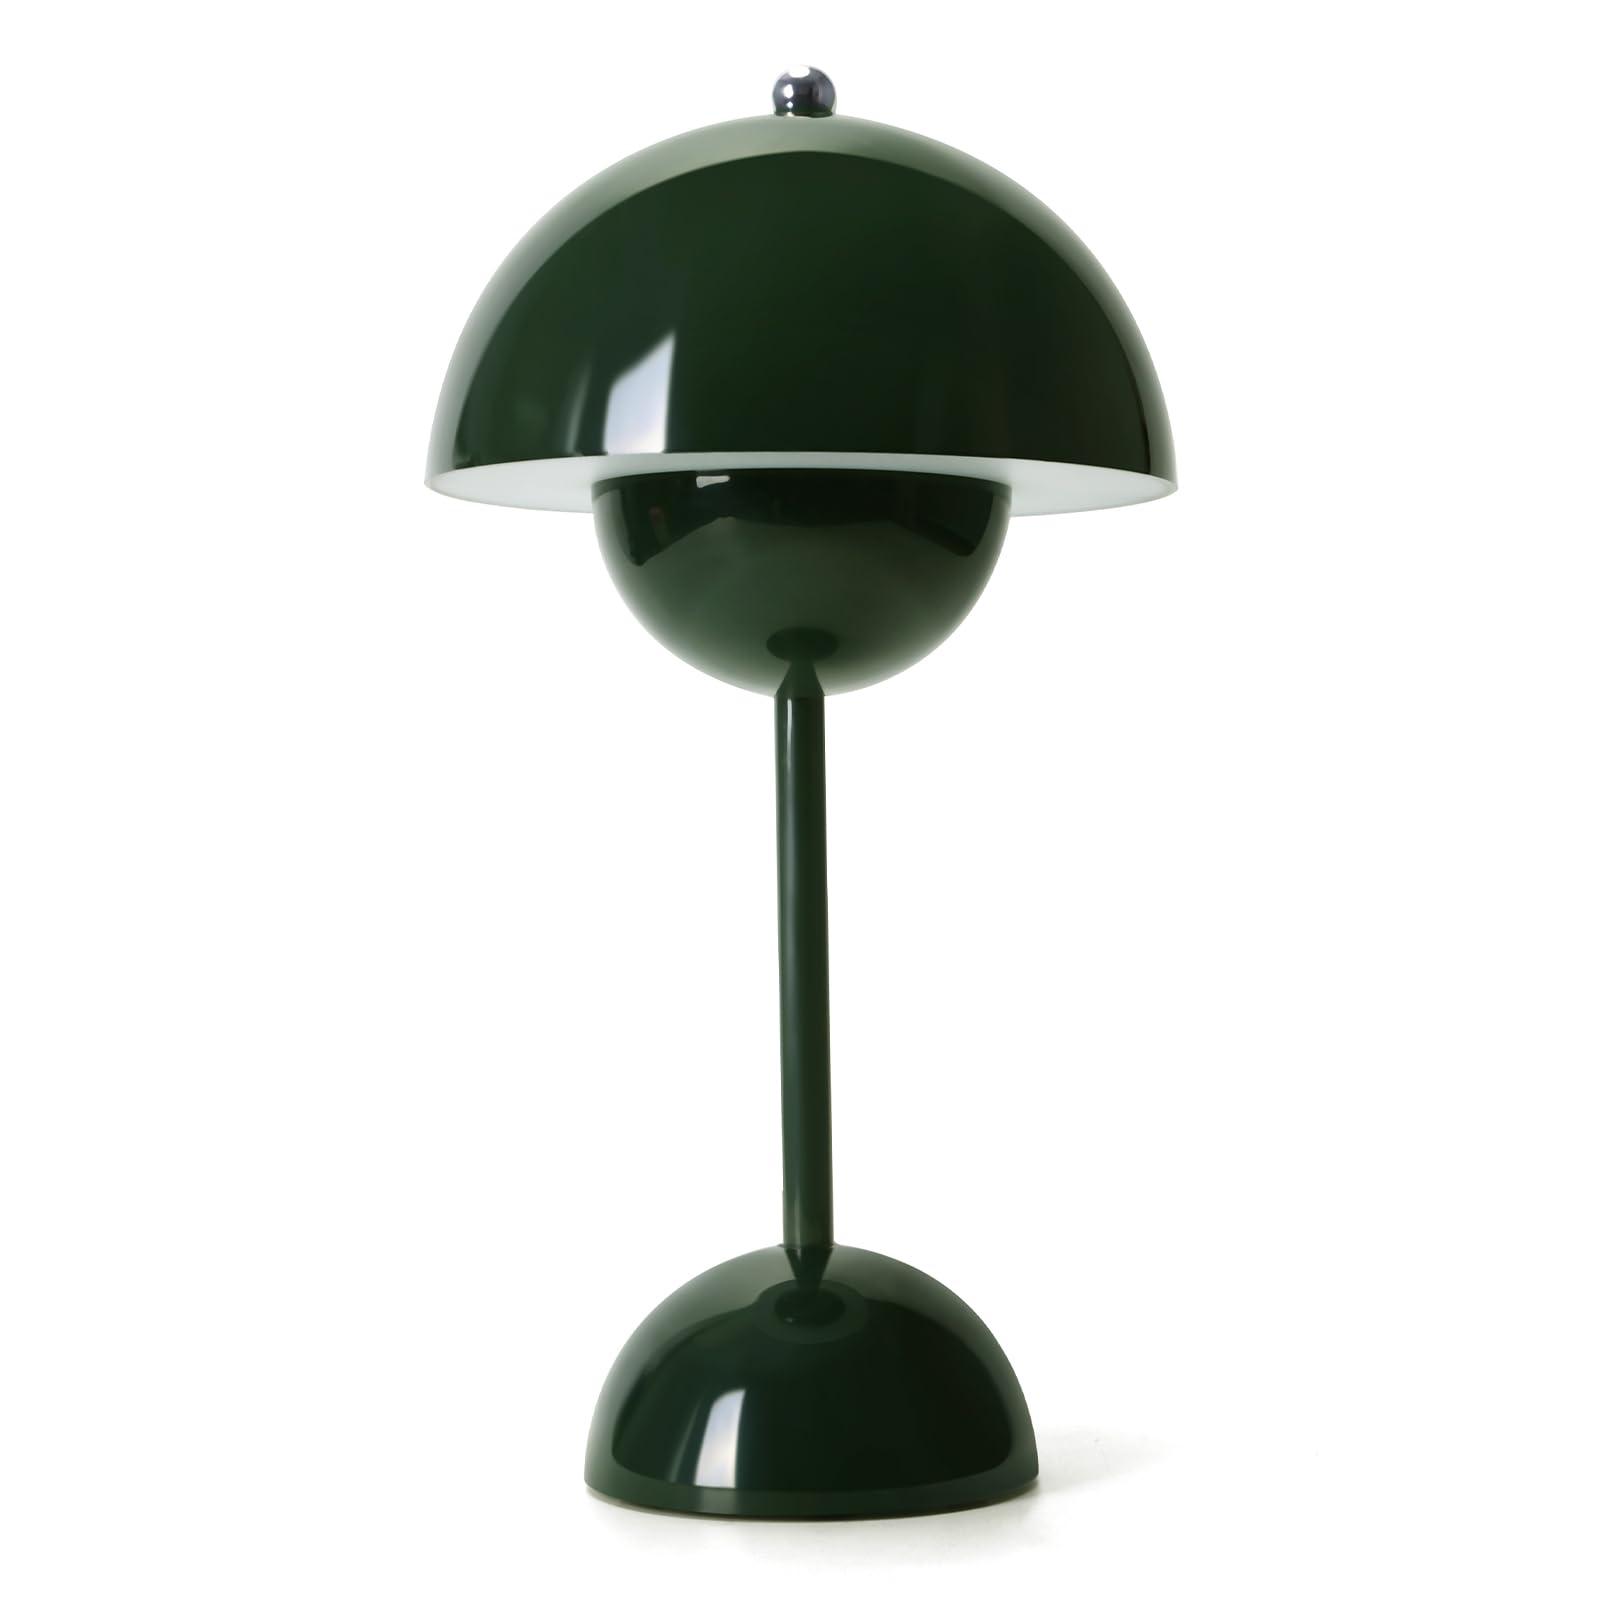 Flowerpot Mushroom LED Table Lamps,Rechargeable Modern Bud Macaron Lamp Vintage Touch Dimmable with 3 Color Bedside Light for Bedroom Living Room Home Office Wedding (Green)